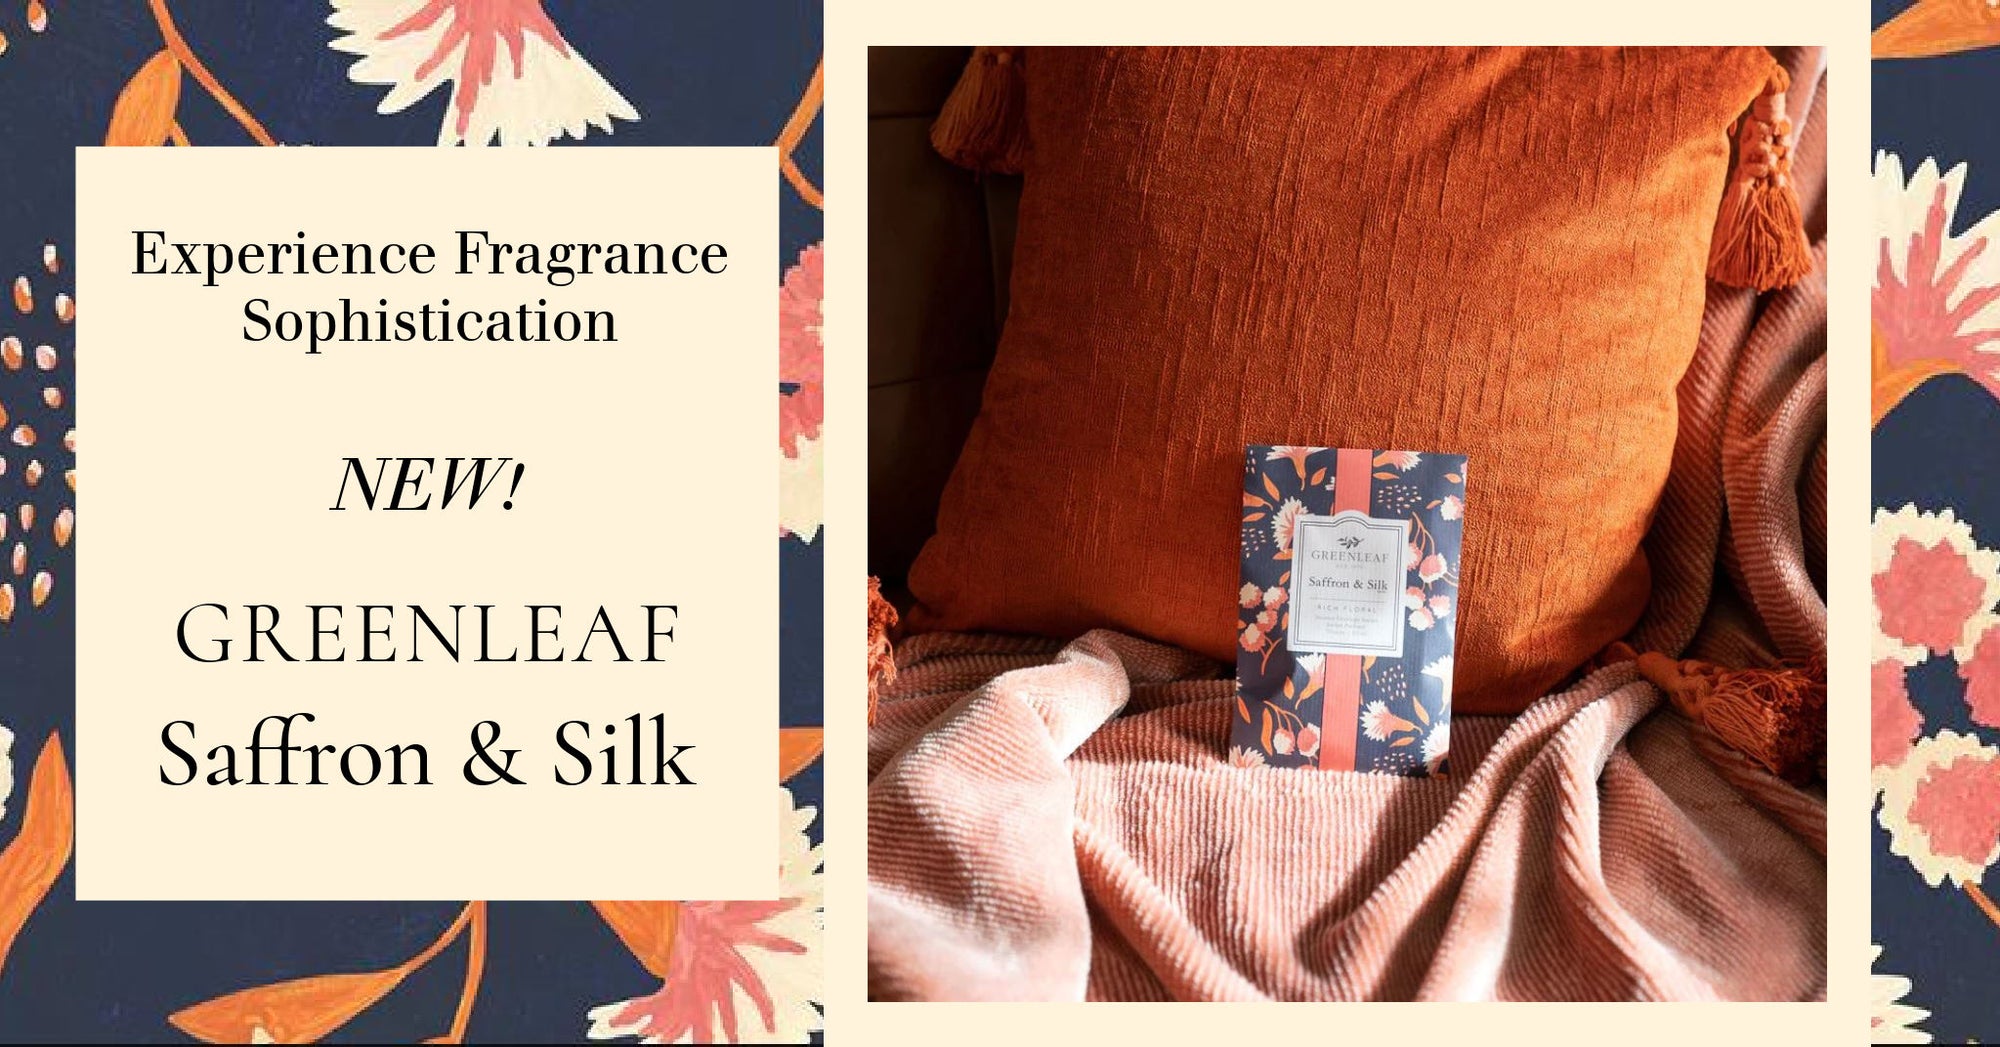 Experience fragrance sophistication with Saffron & Silk by Greenleaf.